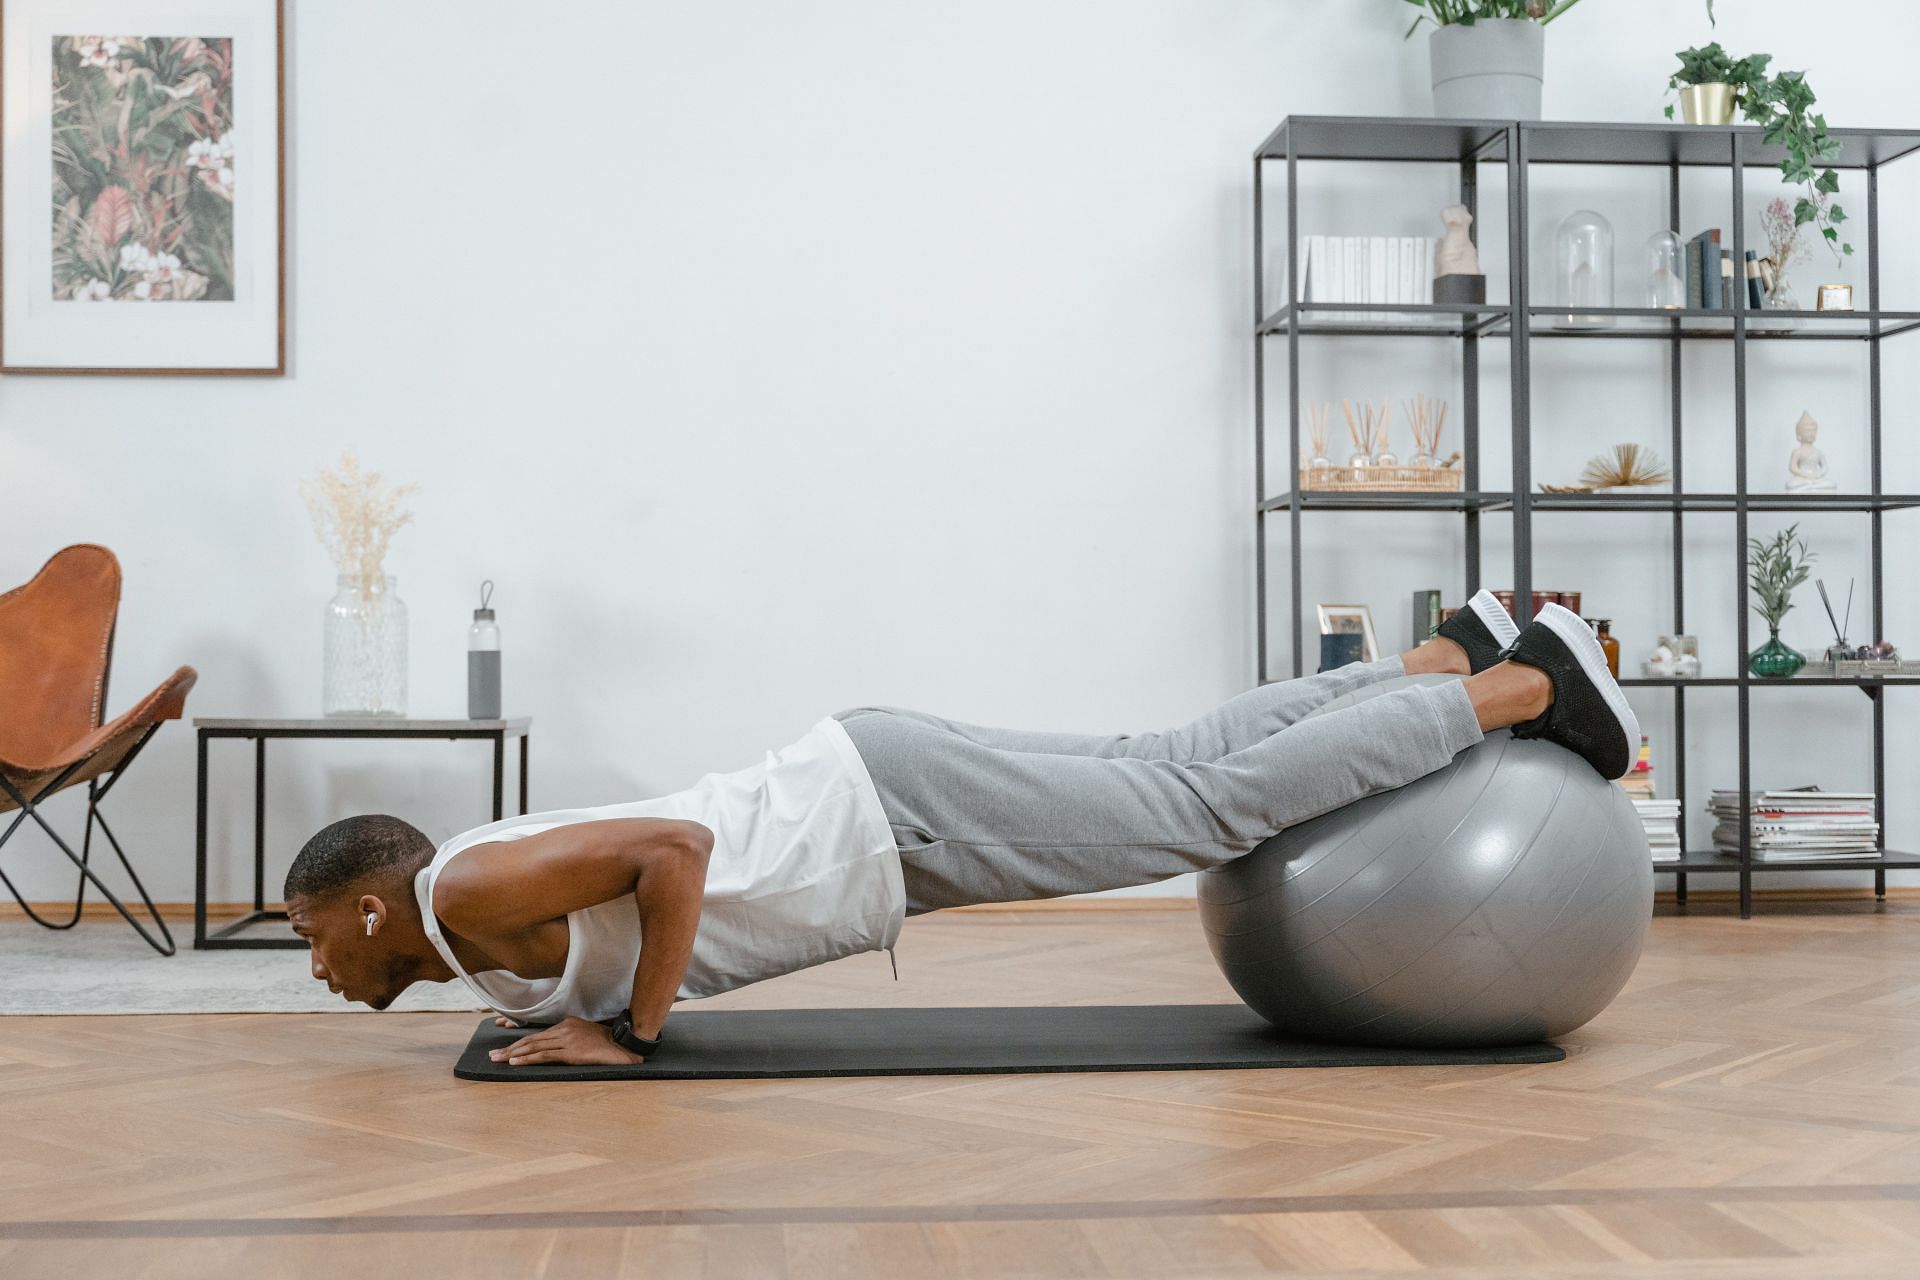 Best and effective exercises using a stability ball. (Image via Pexels/Mart Production)